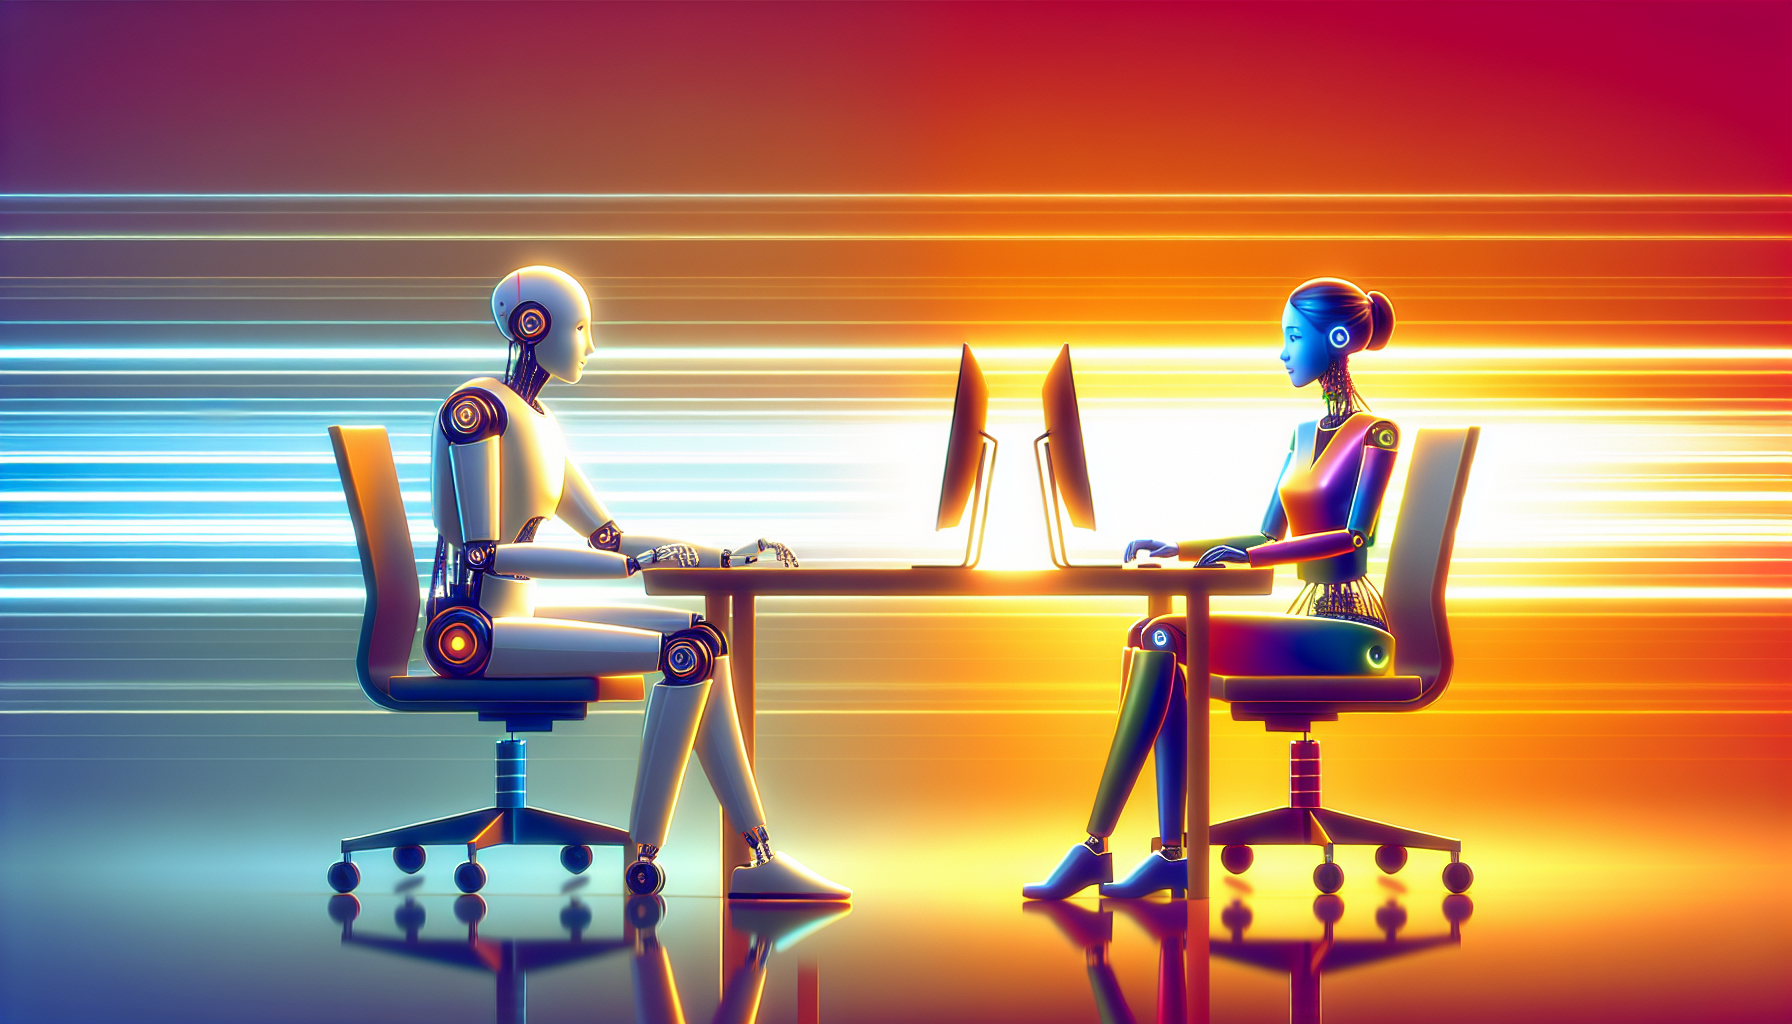 A cover image showing a human and a robot working together on a computer, symbolizing the collaborat